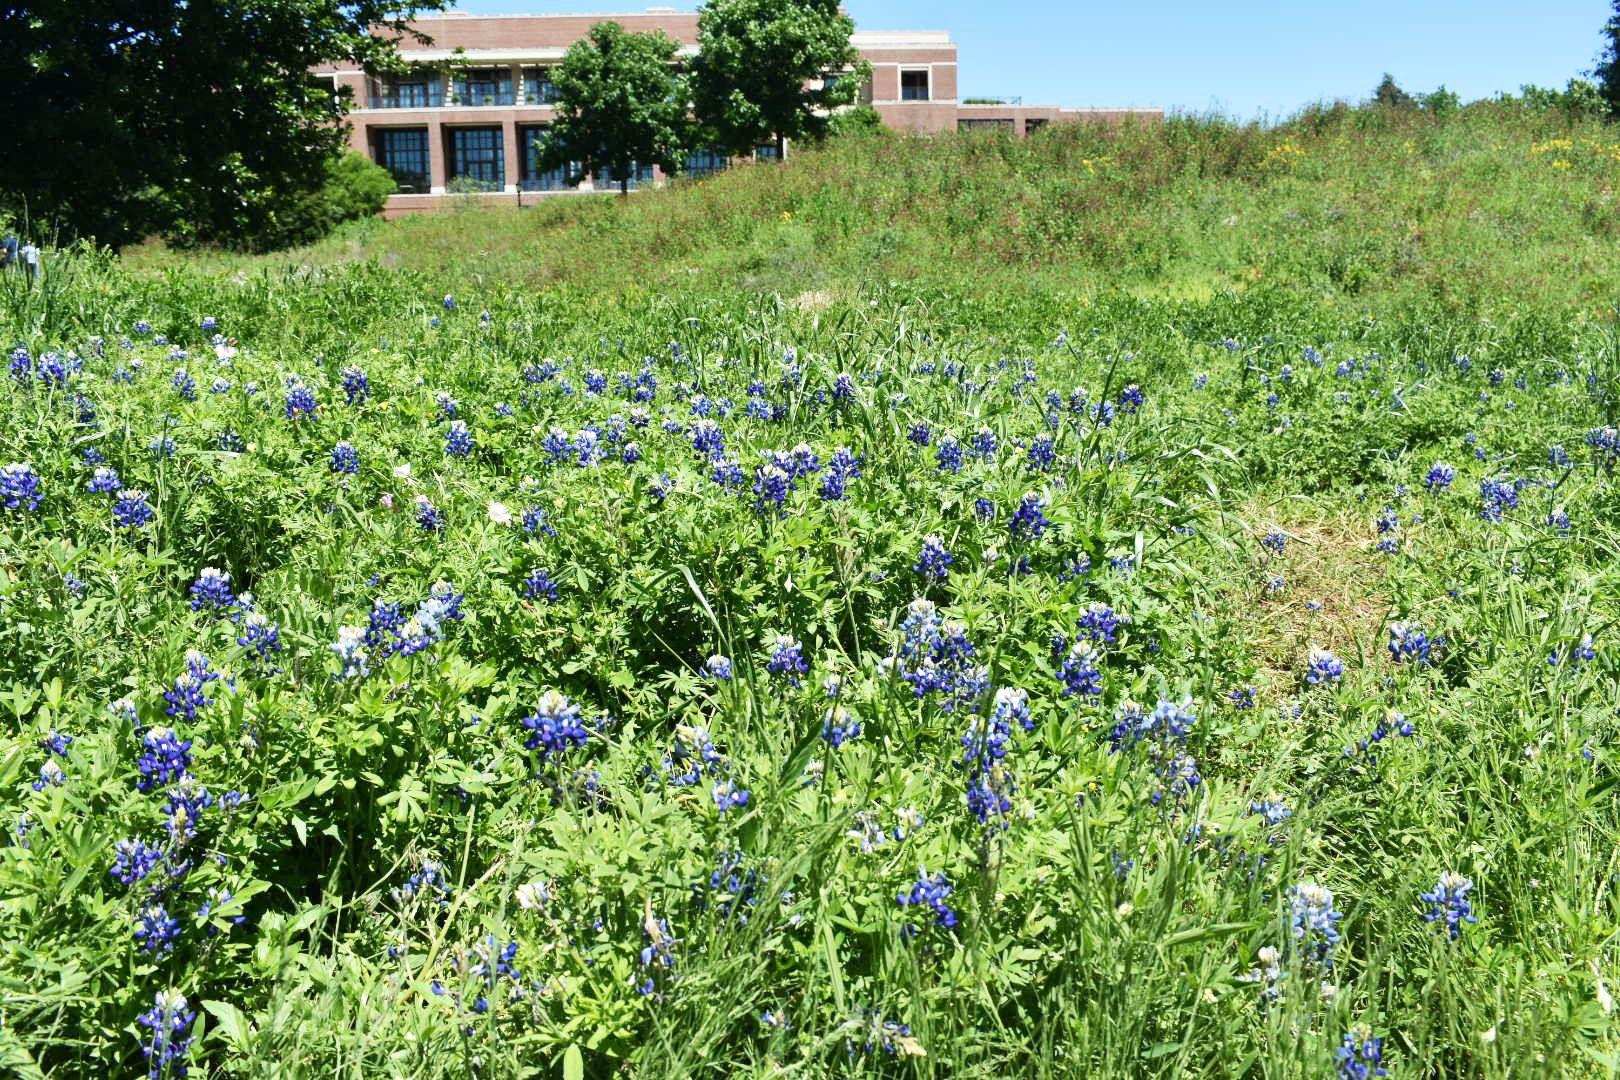 Several bluebonnets in an area of tall, green grass outside of the President George Bush Library in Dallas.